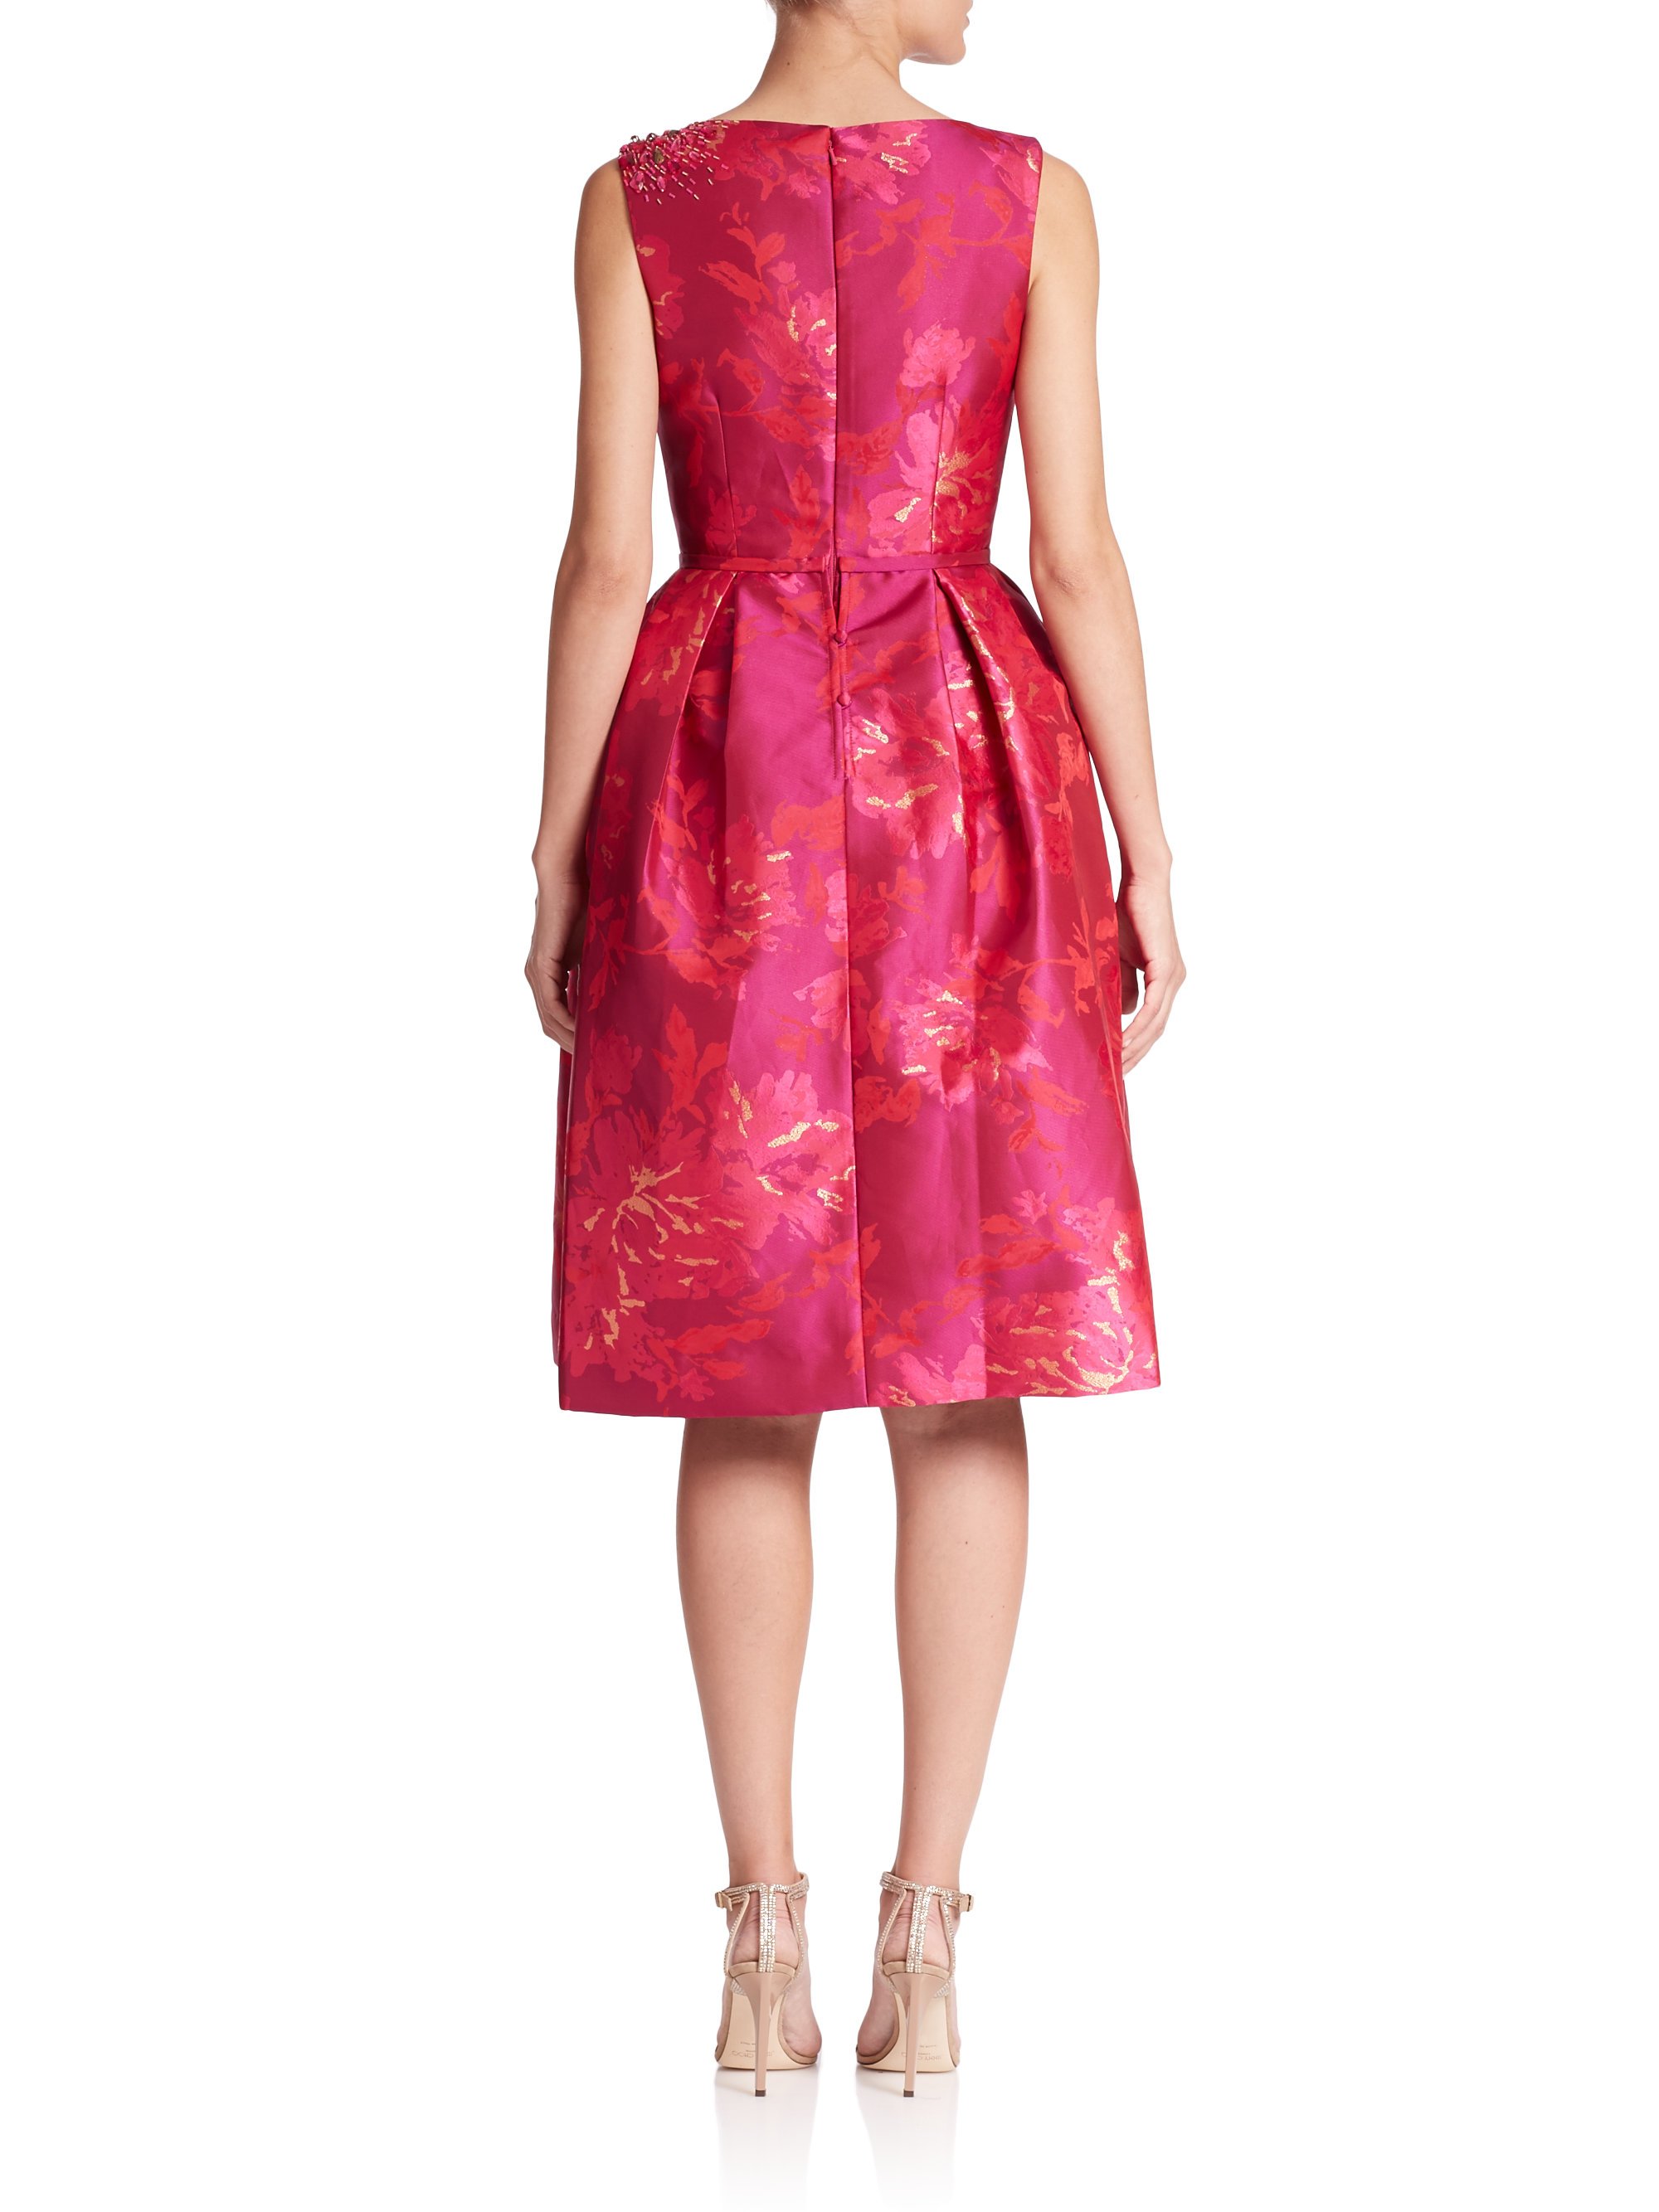 Teri Jon Synthetic Embellished Floral Jacquard Cocktail Dress in ...